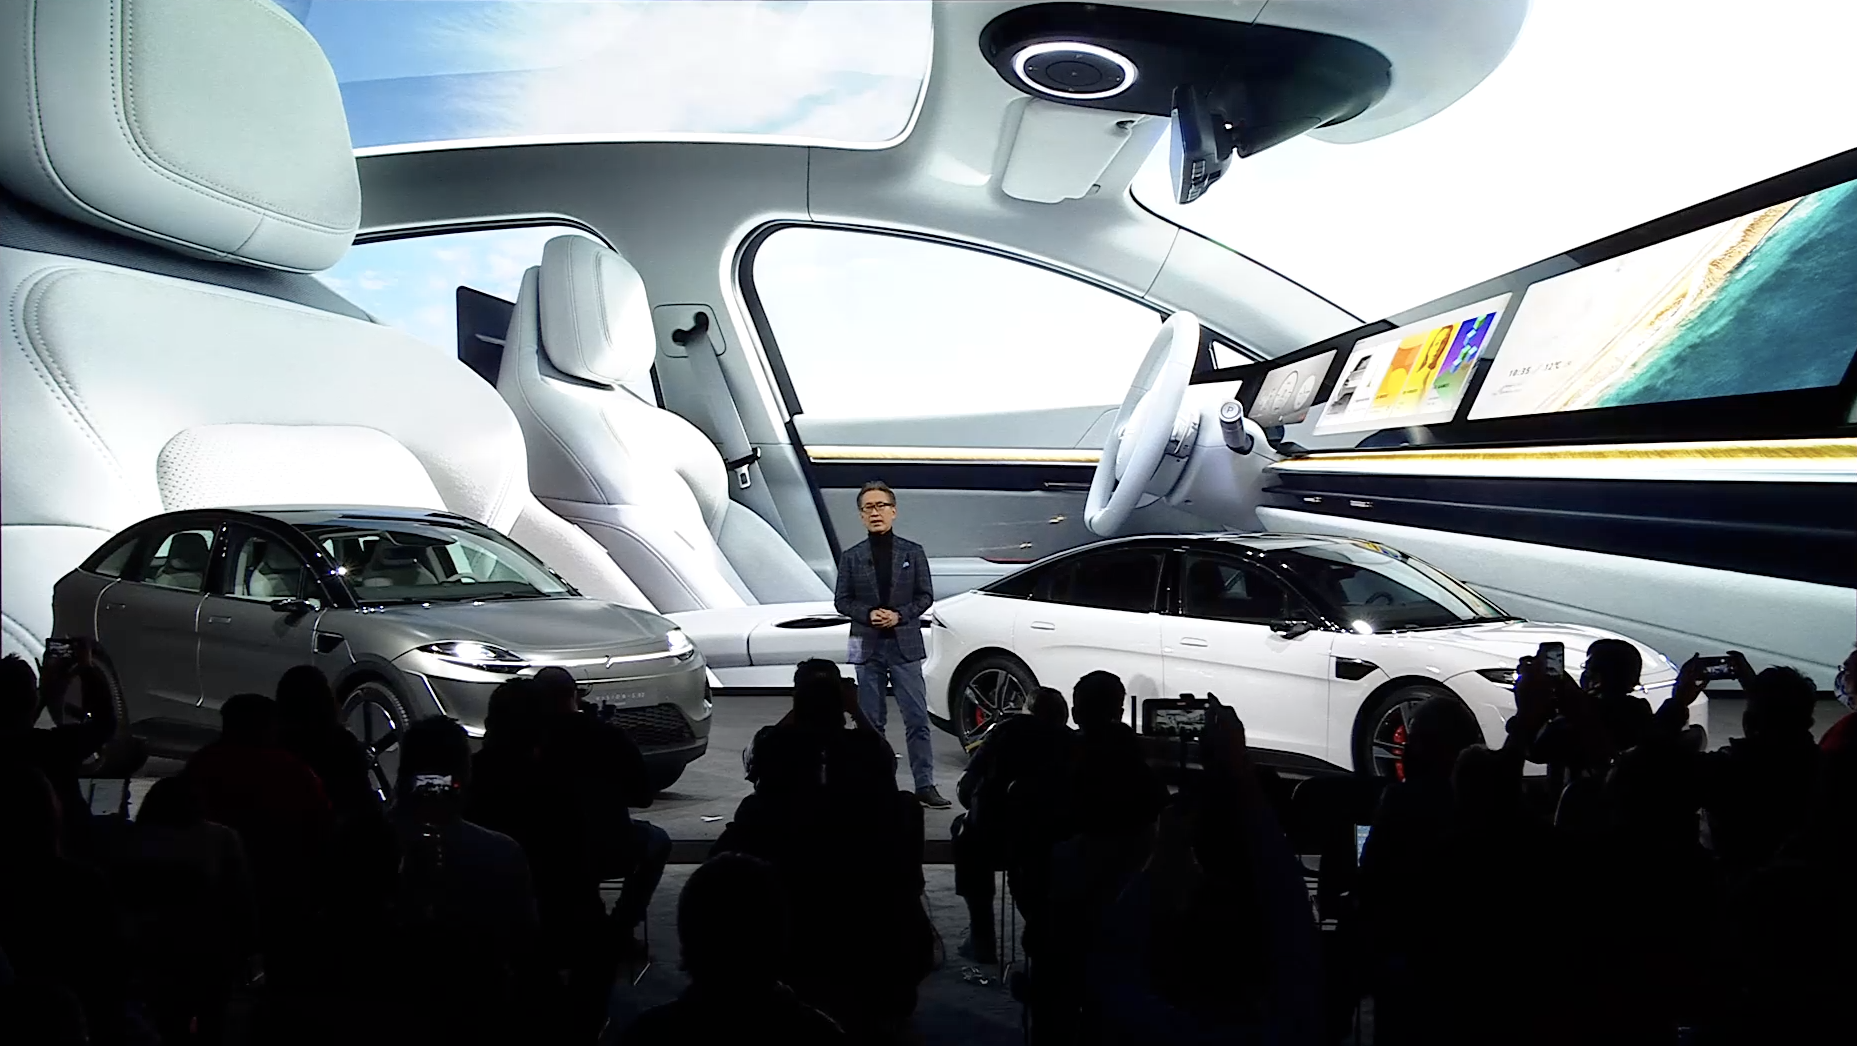 Sony Mobility: Sony’s Kenichiro Yoshida describes the functionality of the interior of the Sony Vision S SUV electric car, shown in prototype form at CES 2022